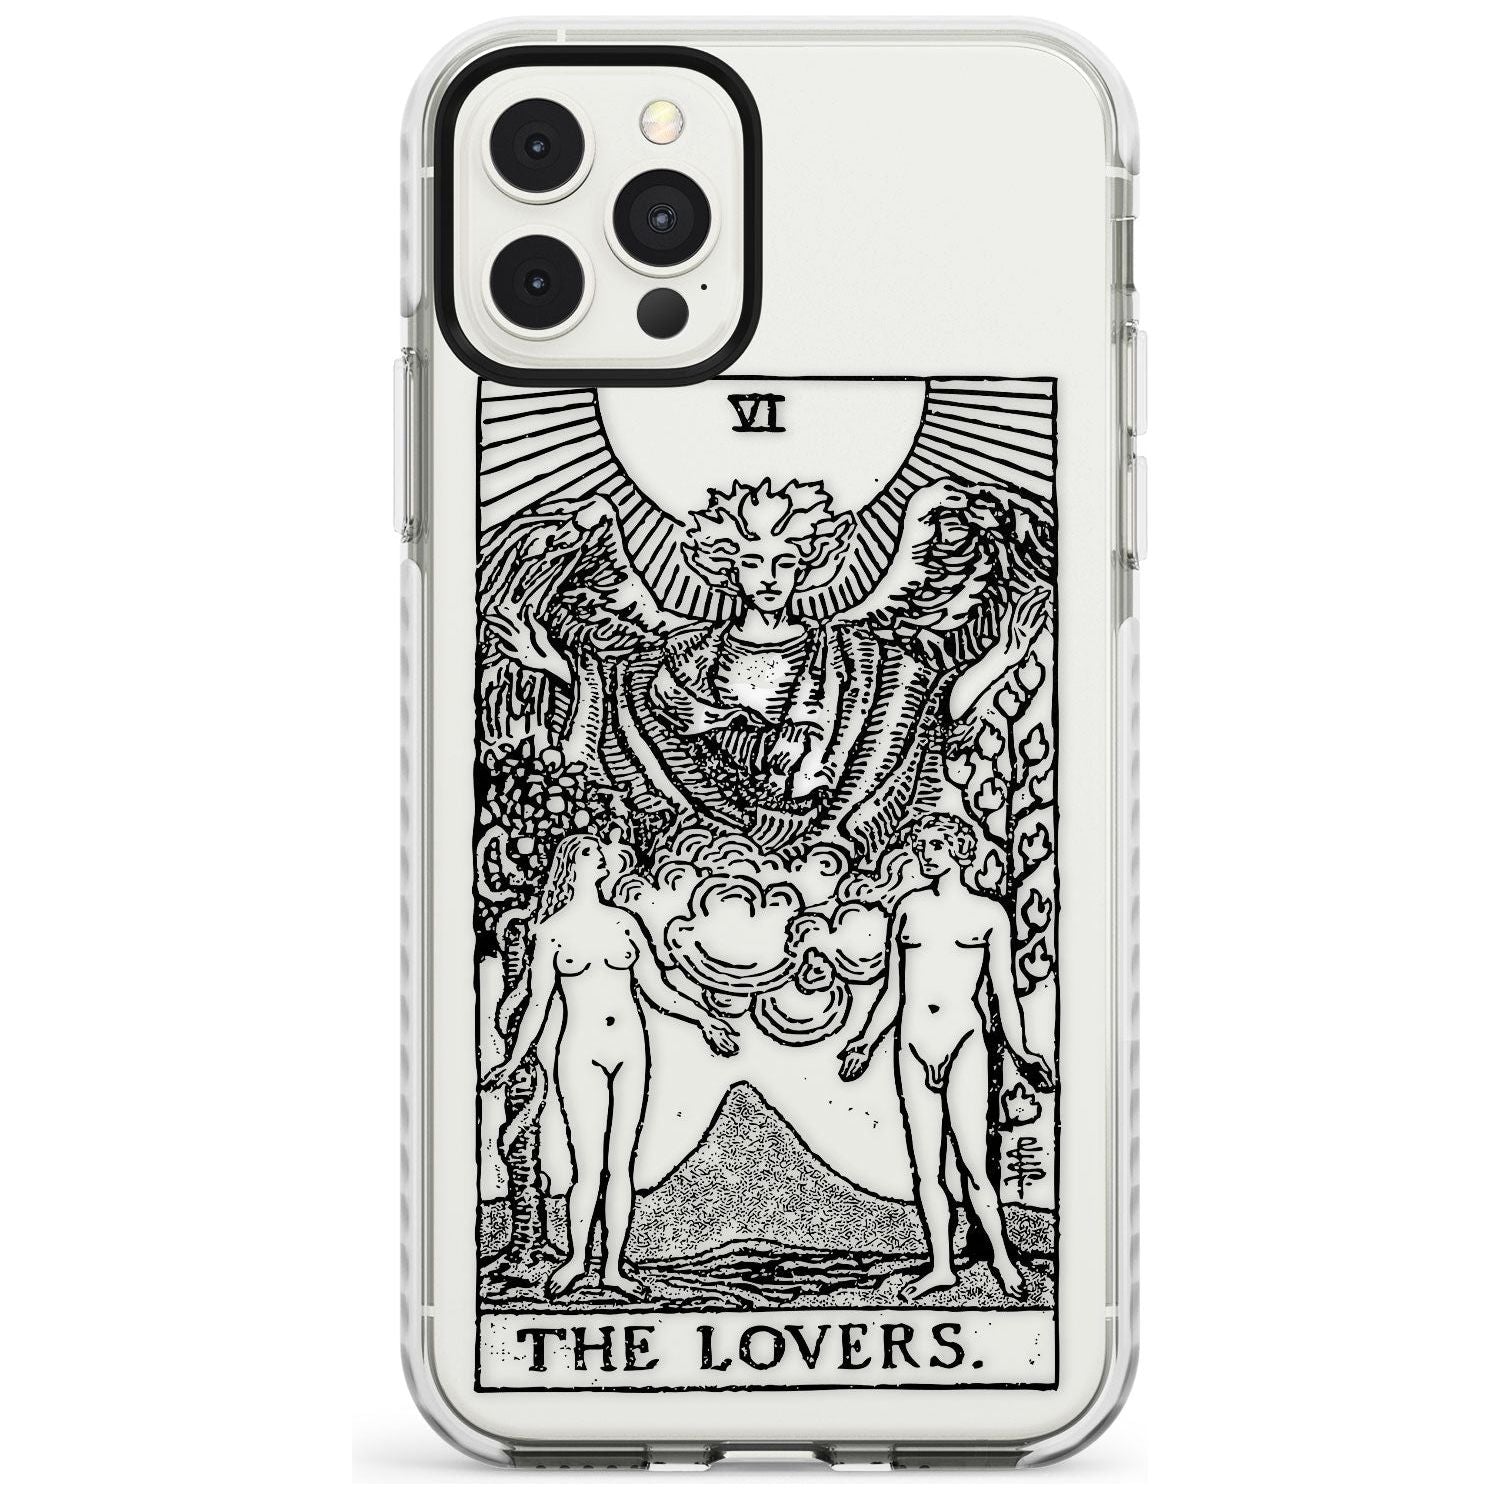 The Lovers Tarot Card - Transparent Slim TPU Phone Case for iPhone 11 Pro Max